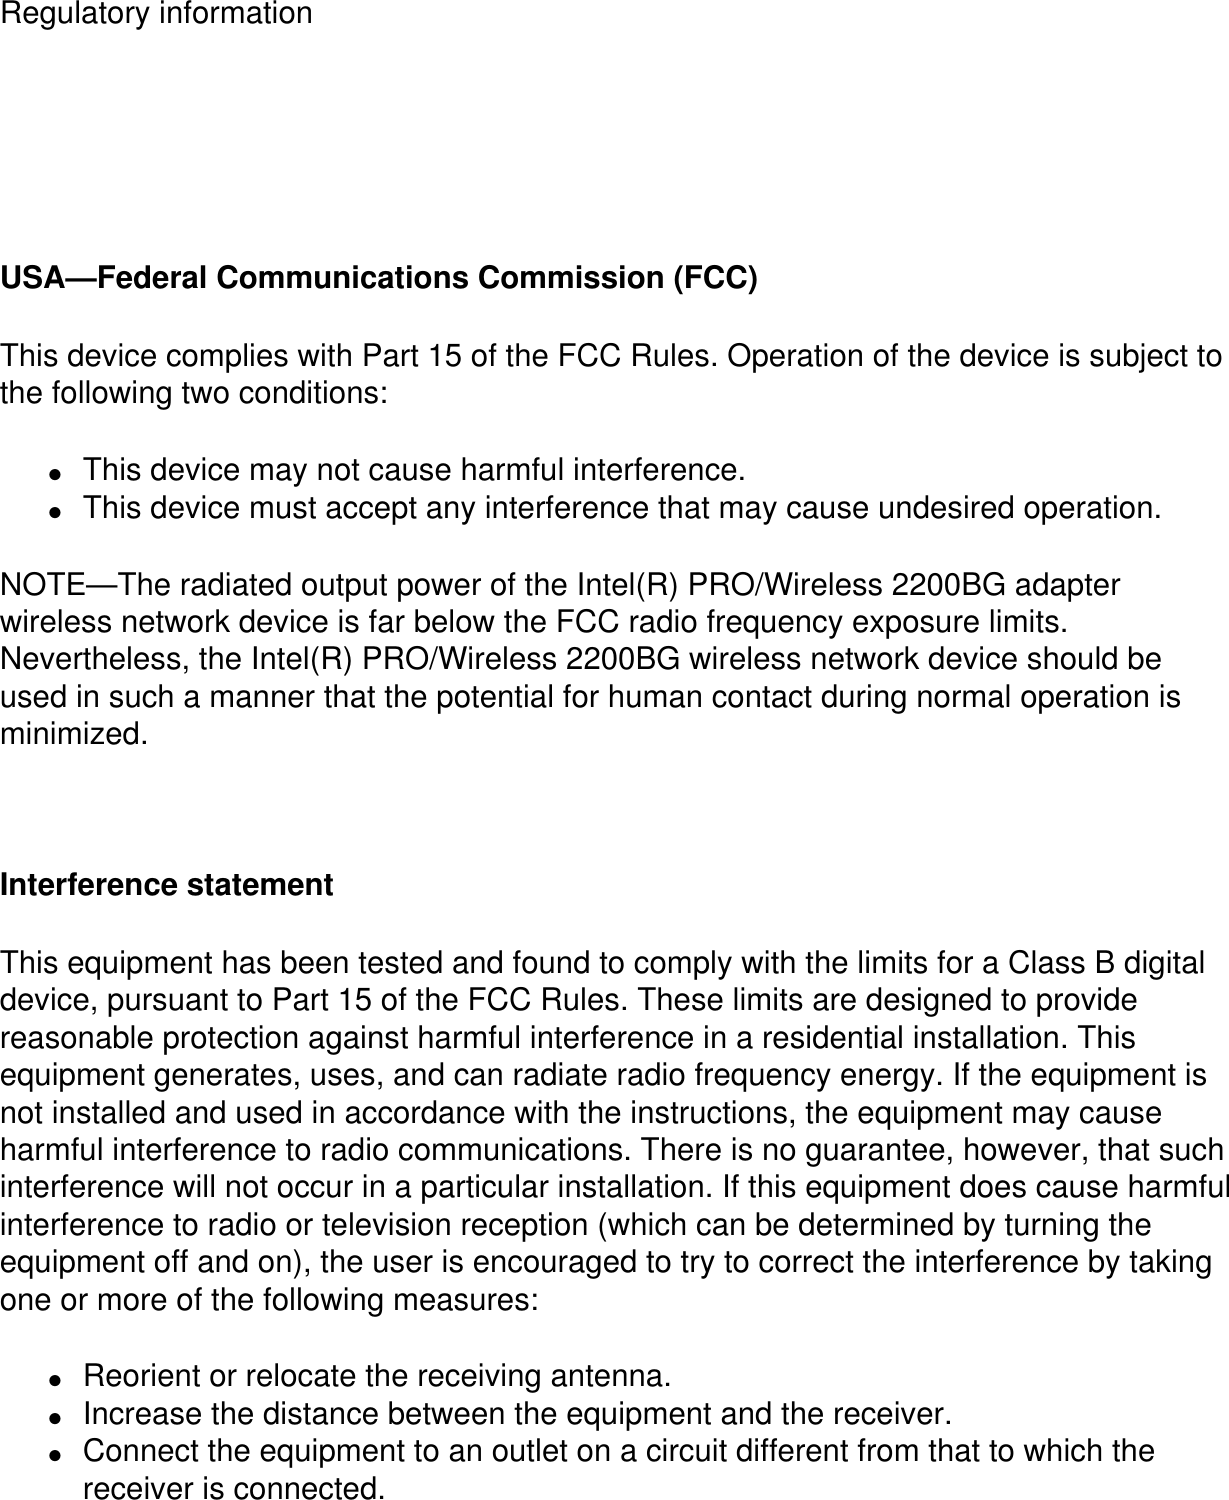 Regulatory information  USA—Federal Communications Commission (FCC)This device complies with Part 15 of the FCC Rules. Operation of the device is subject to the following two conditions:●     This device may not cause harmful interference.●     This device must accept any interference that may cause undesired operation.NOTE—The radiated output power of the Intel(R) PRO/Wireless 2200BG adapter wireless network device is far below the FCC radio frequency exposure limits. Nevertheless, the Intel(R) PRO/Wireless 2200BG wireless network device should be used in such a manner that the potential for human contact during normal operation is minimized.  Interference statementThis equipment has been tested and found to comply with the limits for a Class B digital device, pursuant to Part 15 of the FCC Rules. These limits are designed to provide reasonable protection against harmful interference in a residential installation. This equipment generates, uses, and can radiate radio frequency energy. If the equipment is not installed and used in accordance with the instructions, the equipment may cause harmful interference to radio communications. There is no guarantee, however, that such interference will not occur in a particular installation. If this equipment does cause harmful interference to radio or television reception (which can be determined by turning the equipment off and on), the user is encouraged to try to correct the interference by taking one or more of the following measures:●     Reorient or relocate the receiving antenna.●     Increase the distance between the equipment and the receiver.●     Connect the equipment to an outlet on a circuit different from that to which the receiver is connected.